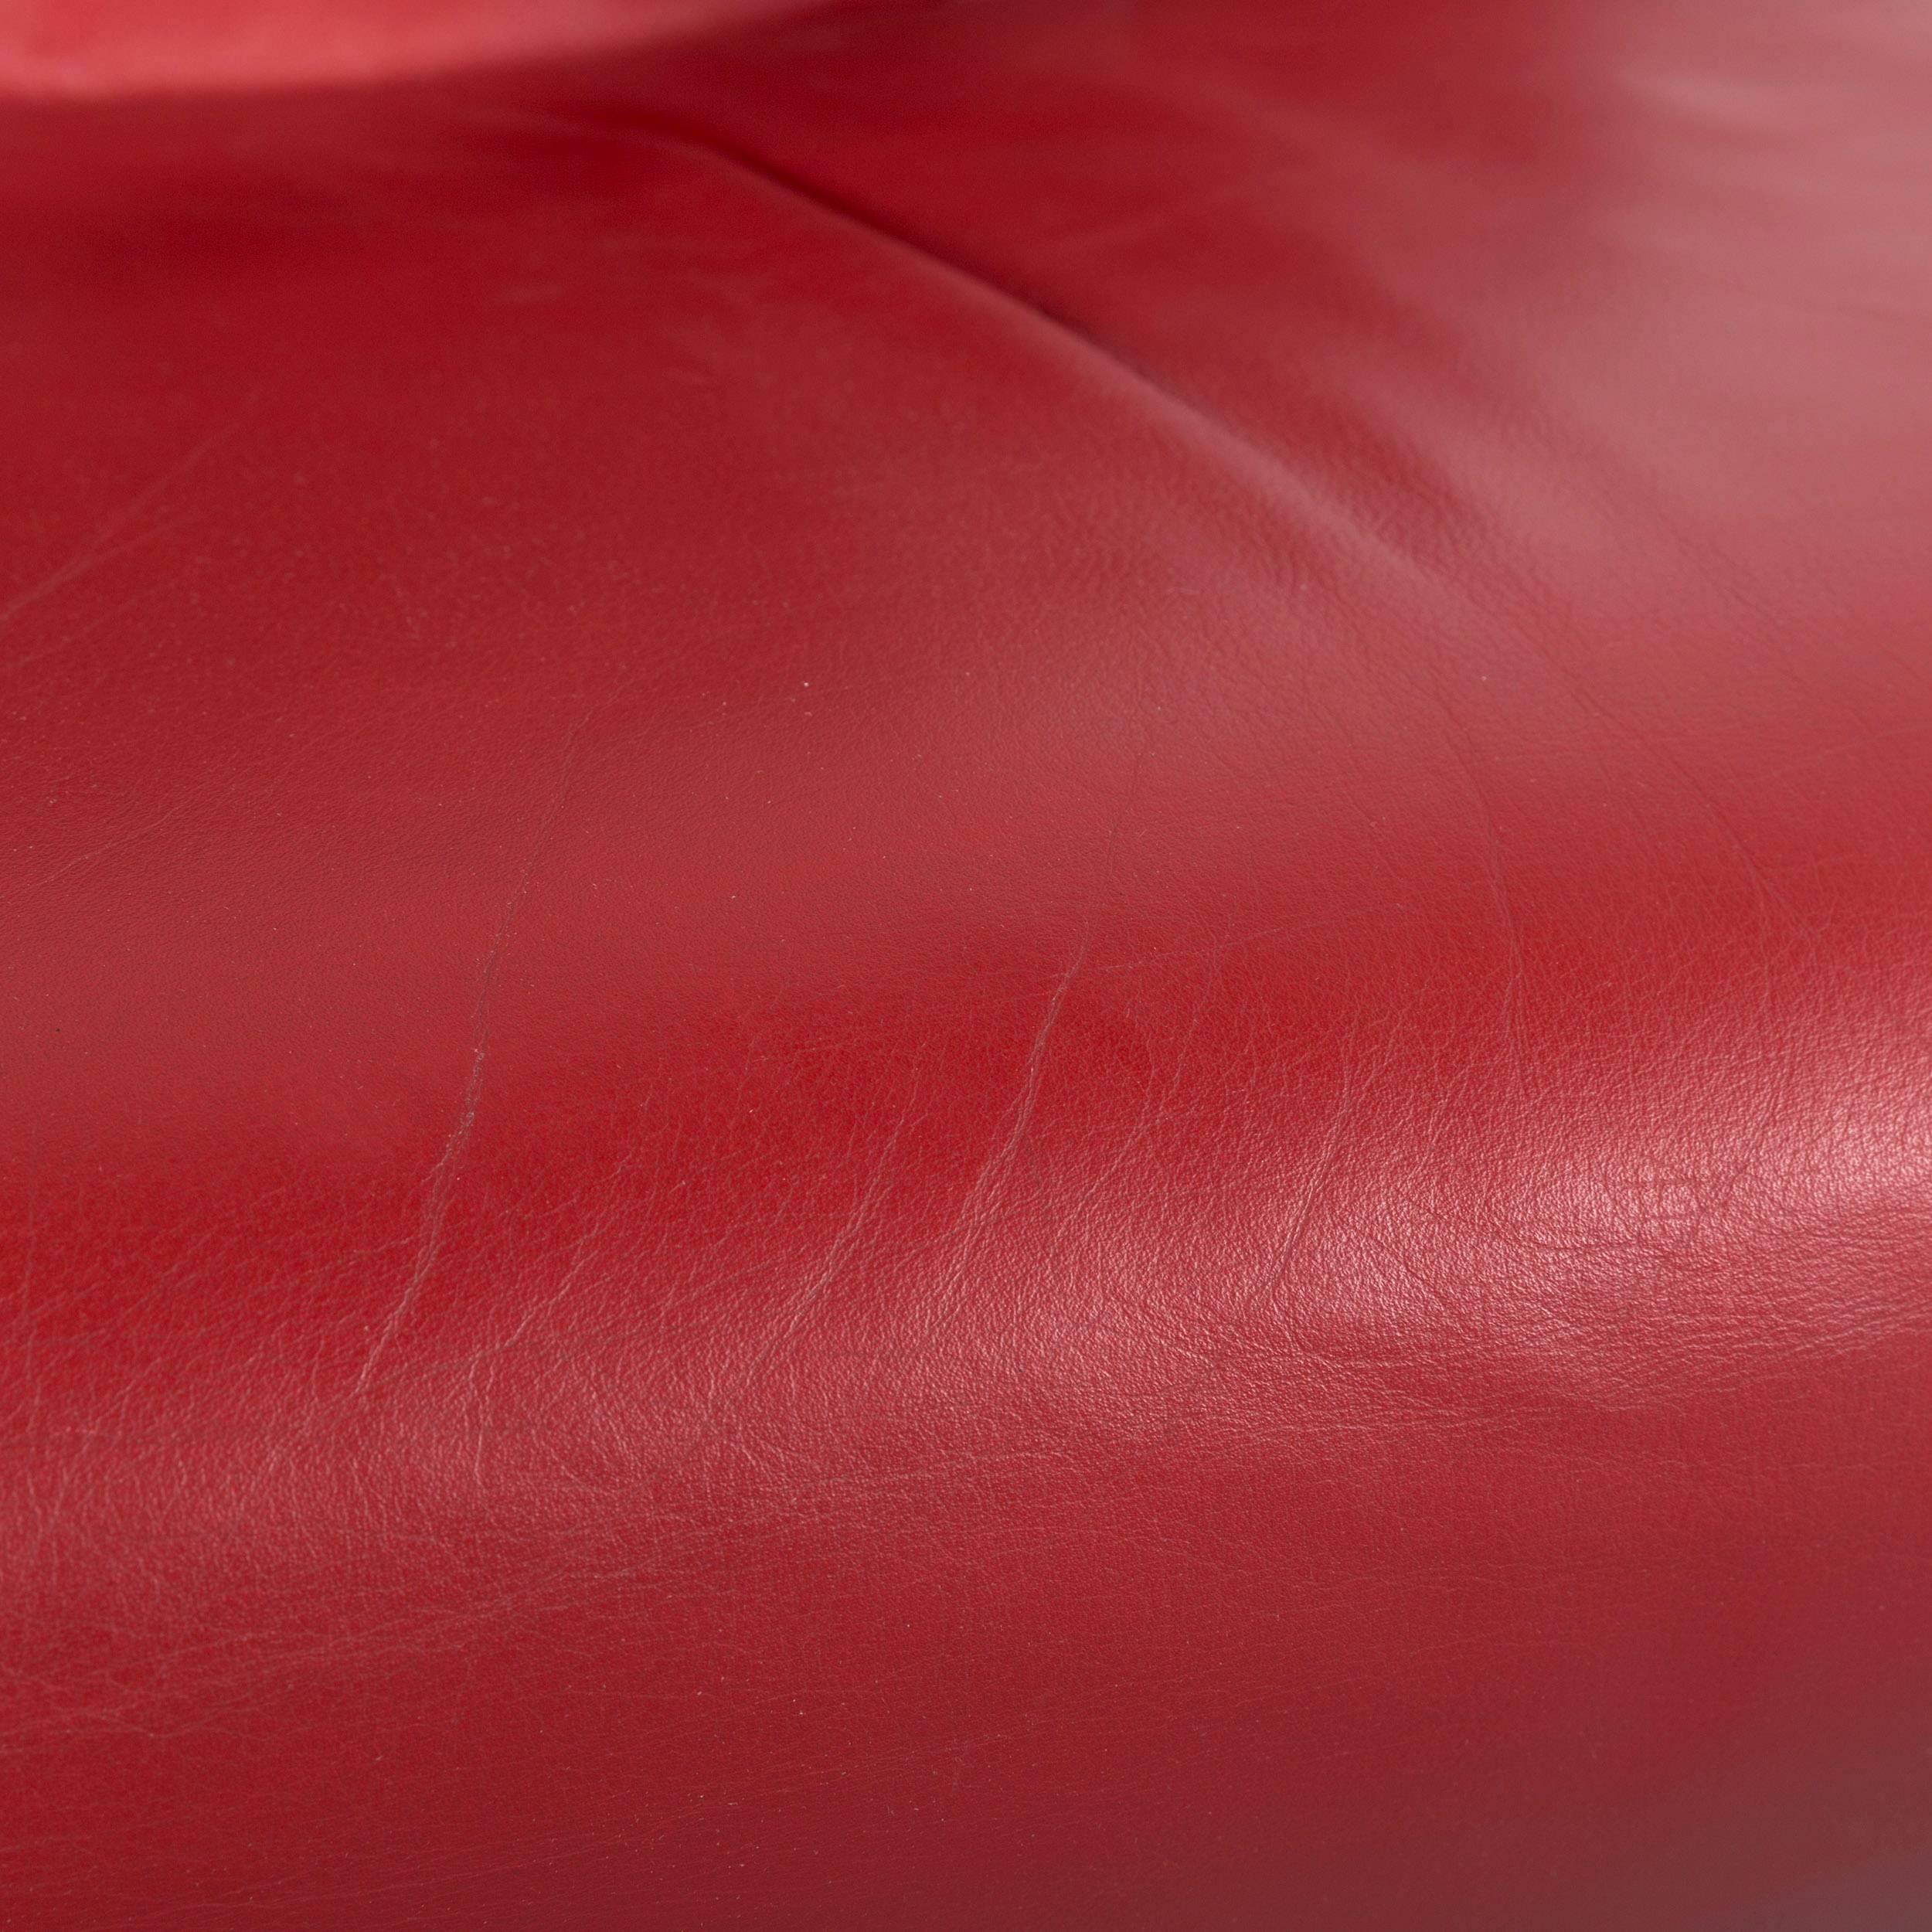 Contemporary Interprofil Pax Leather Armchair Red One-Seat Couch